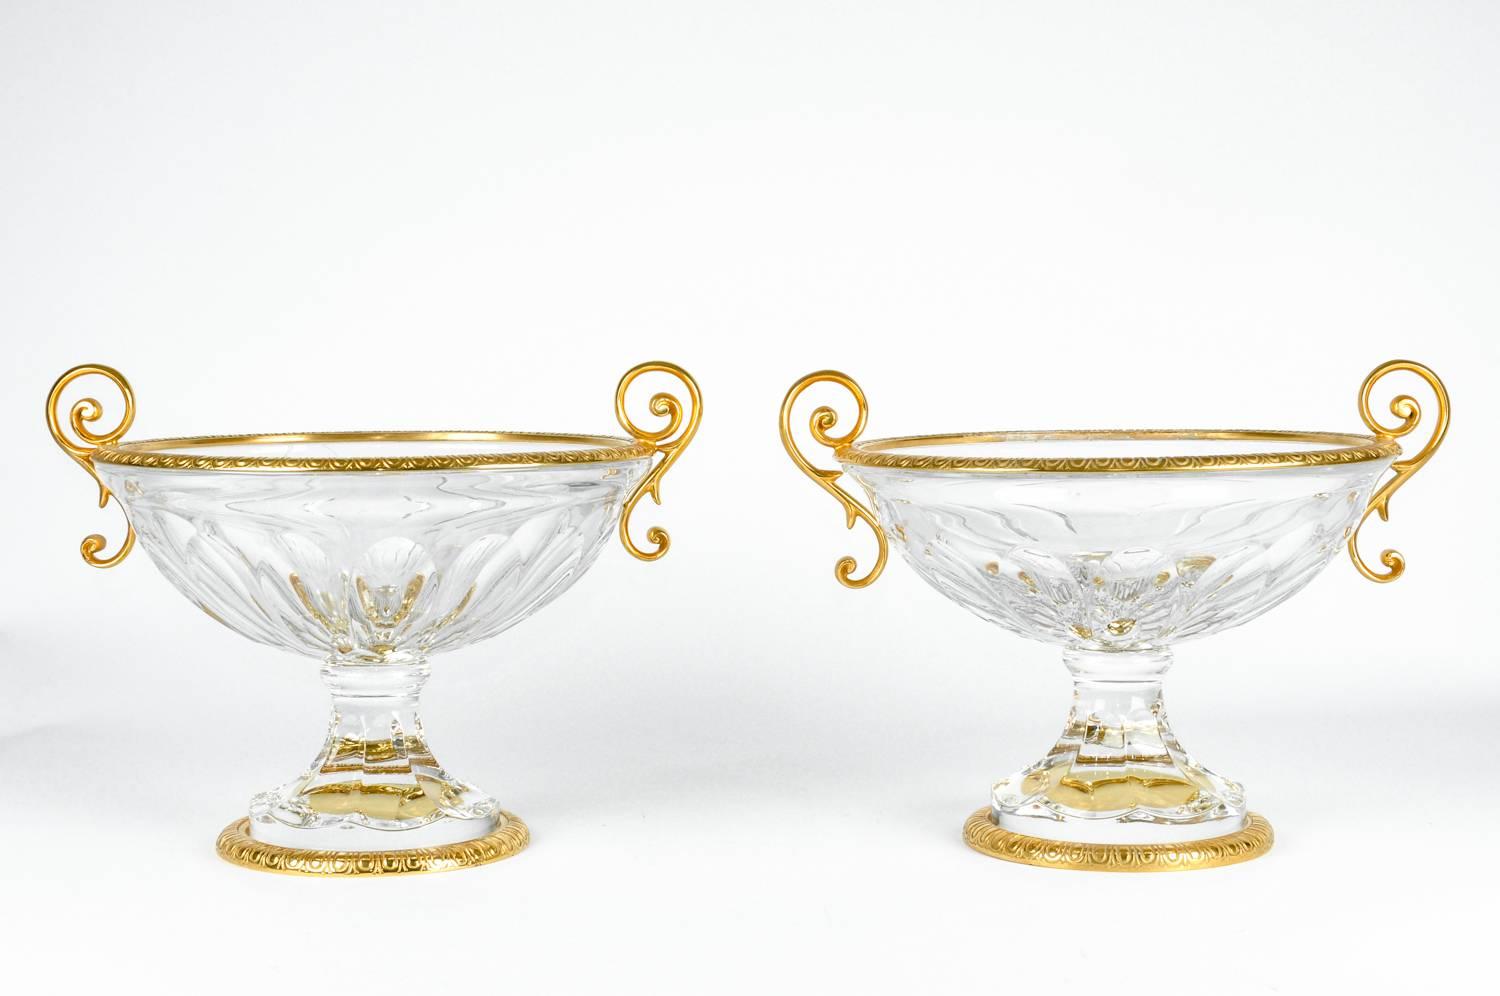 Antique pair of French heavy cut crystal centerpieces / vases with brass frame design details. Each piece measure 12